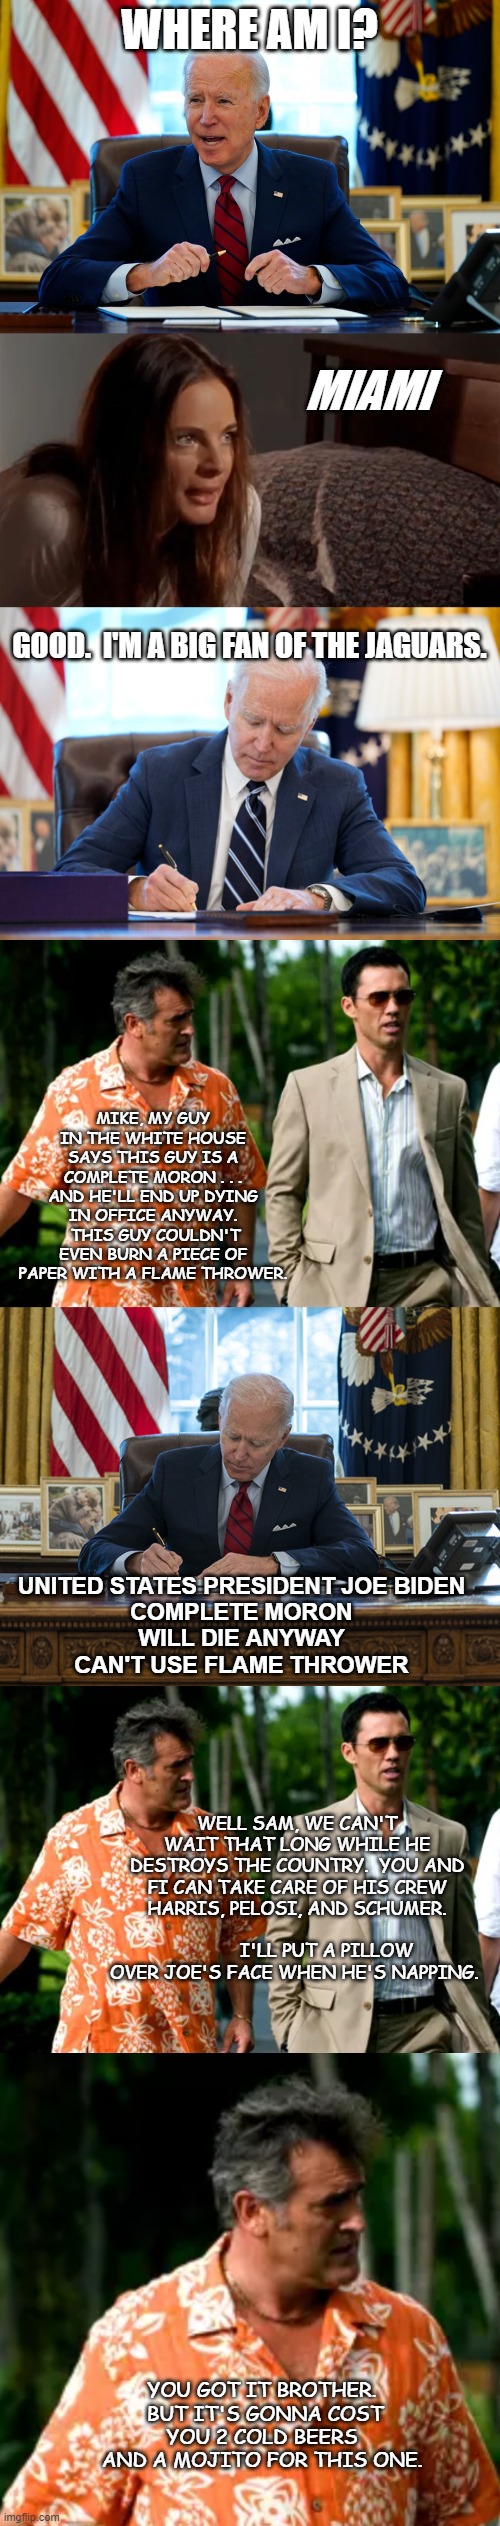 Burn Notice - Joe Biden's on Michael Weston's List! | WHERE AM I? MIAMI; GOOD.  I'M A BIG FAN OF THE JAGUARS. MIKE, MY GUY IN THE WHITE HOUSE SAYS THIS GUY IS A COMPLETE MORON . . . AND HE'LL END UP DYING IN OFFICE ANYWAY.  THIS GUY COULDN'T EVEN BURN A PIECE OF PAPER WITH A FLAME THROWER. UNITED STATES PRESIDENT JOE BIDEN
COMPLETE MORON
WILL DIE ANYWAY
CAN'T USE FLAME THROWER; WELL SAM, WE CAN'T WAIT THAT LONG WHILE HE DESTROYS THE COUNTRY.  YOU AND FI CAN TAKE CARE OF HIS CREW HARRIS, PELOSI, AND SCHUMER.                                      I'LL PUT A PILLOW OVER JOE'S FACE WHEN HE'S NAPPING. YOU GOT IT BROTHER.  BUT IT'S GONNA COST YOU 2 COLD BEERS AND A MOJITO FOR THIS ONE. | image tagged in burn notice,michael weston,joe biden,miami,democrats,mojitos | made w/ Imgflip meme maker